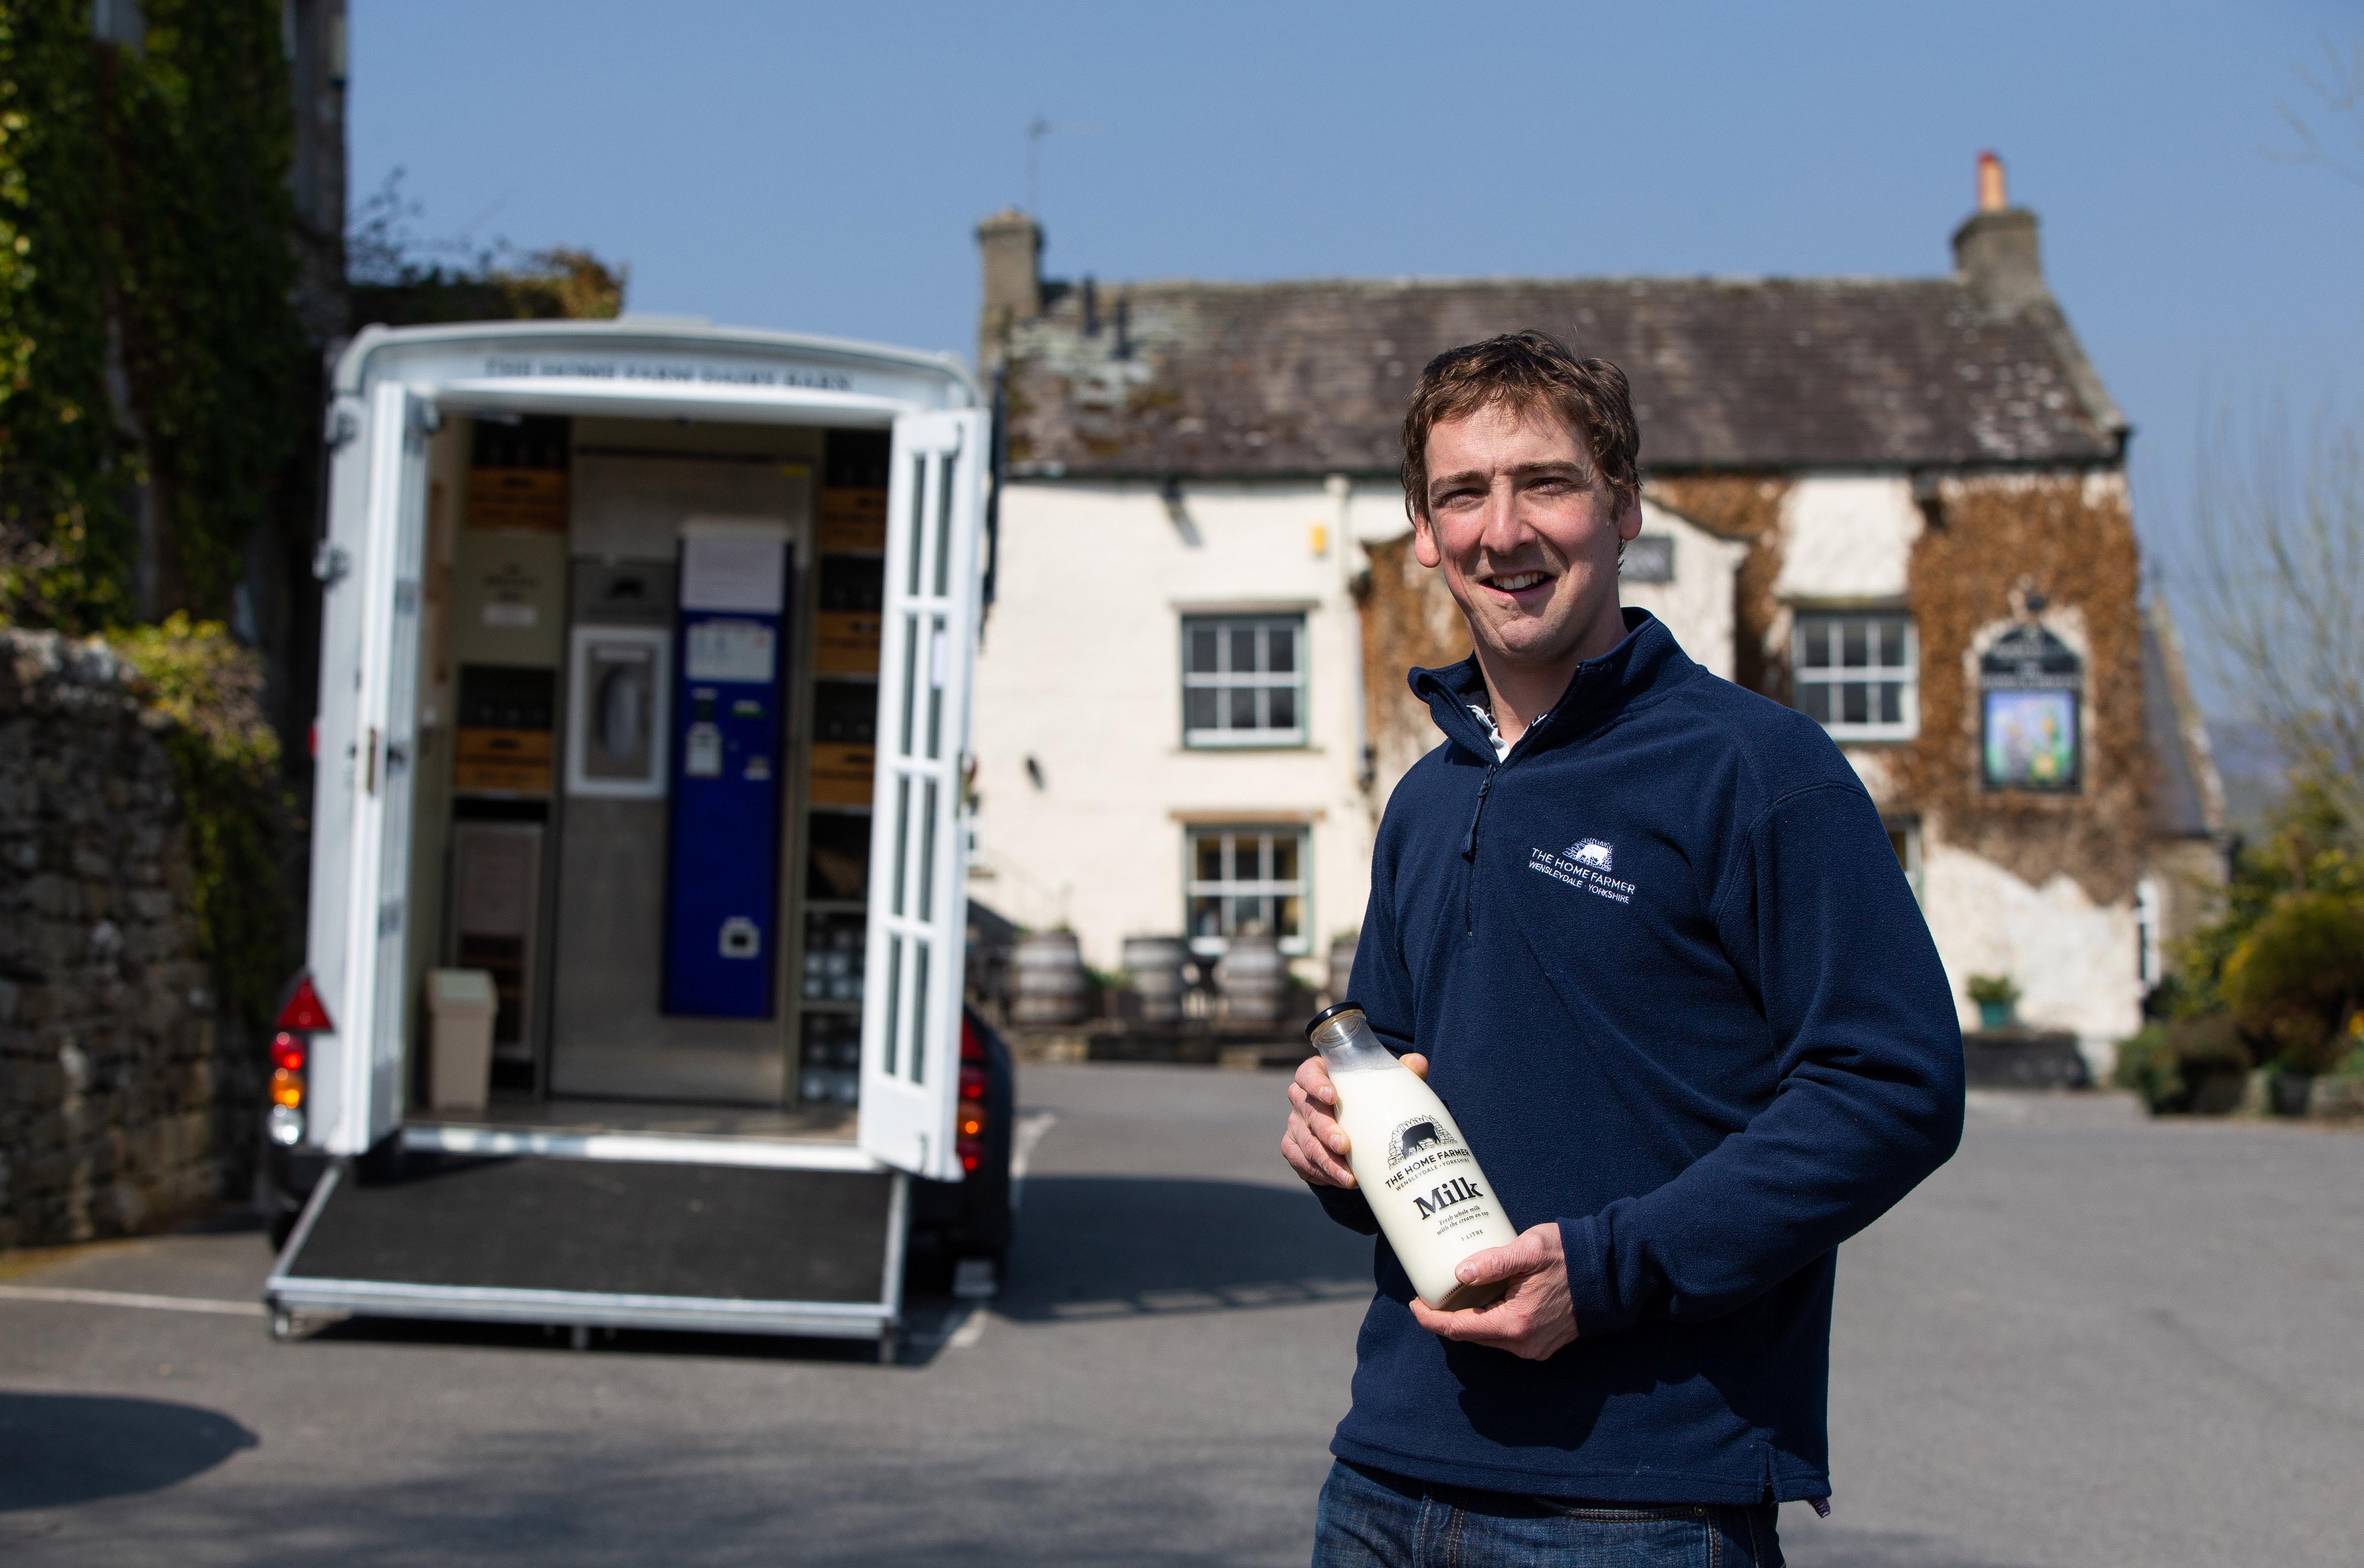 Horsebox converted into UK’s first mobile milk vending machine